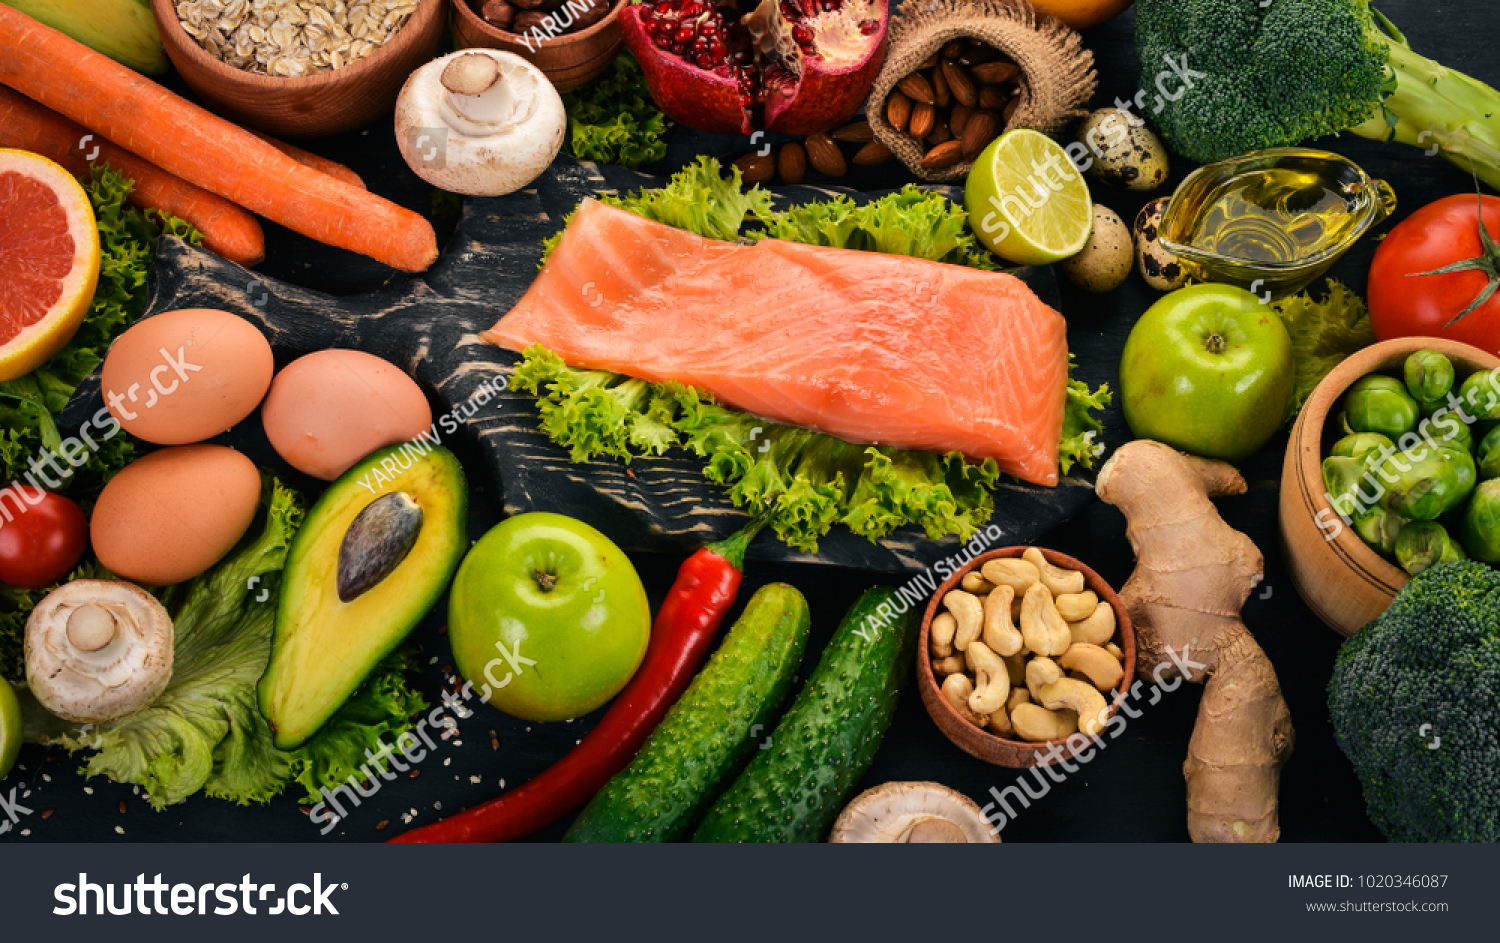 Healthy food. Fish salmon, avocado, broccoli, fresh vegetables, nuts and fruits. On a black background. Top view. Copy space. #1020346087